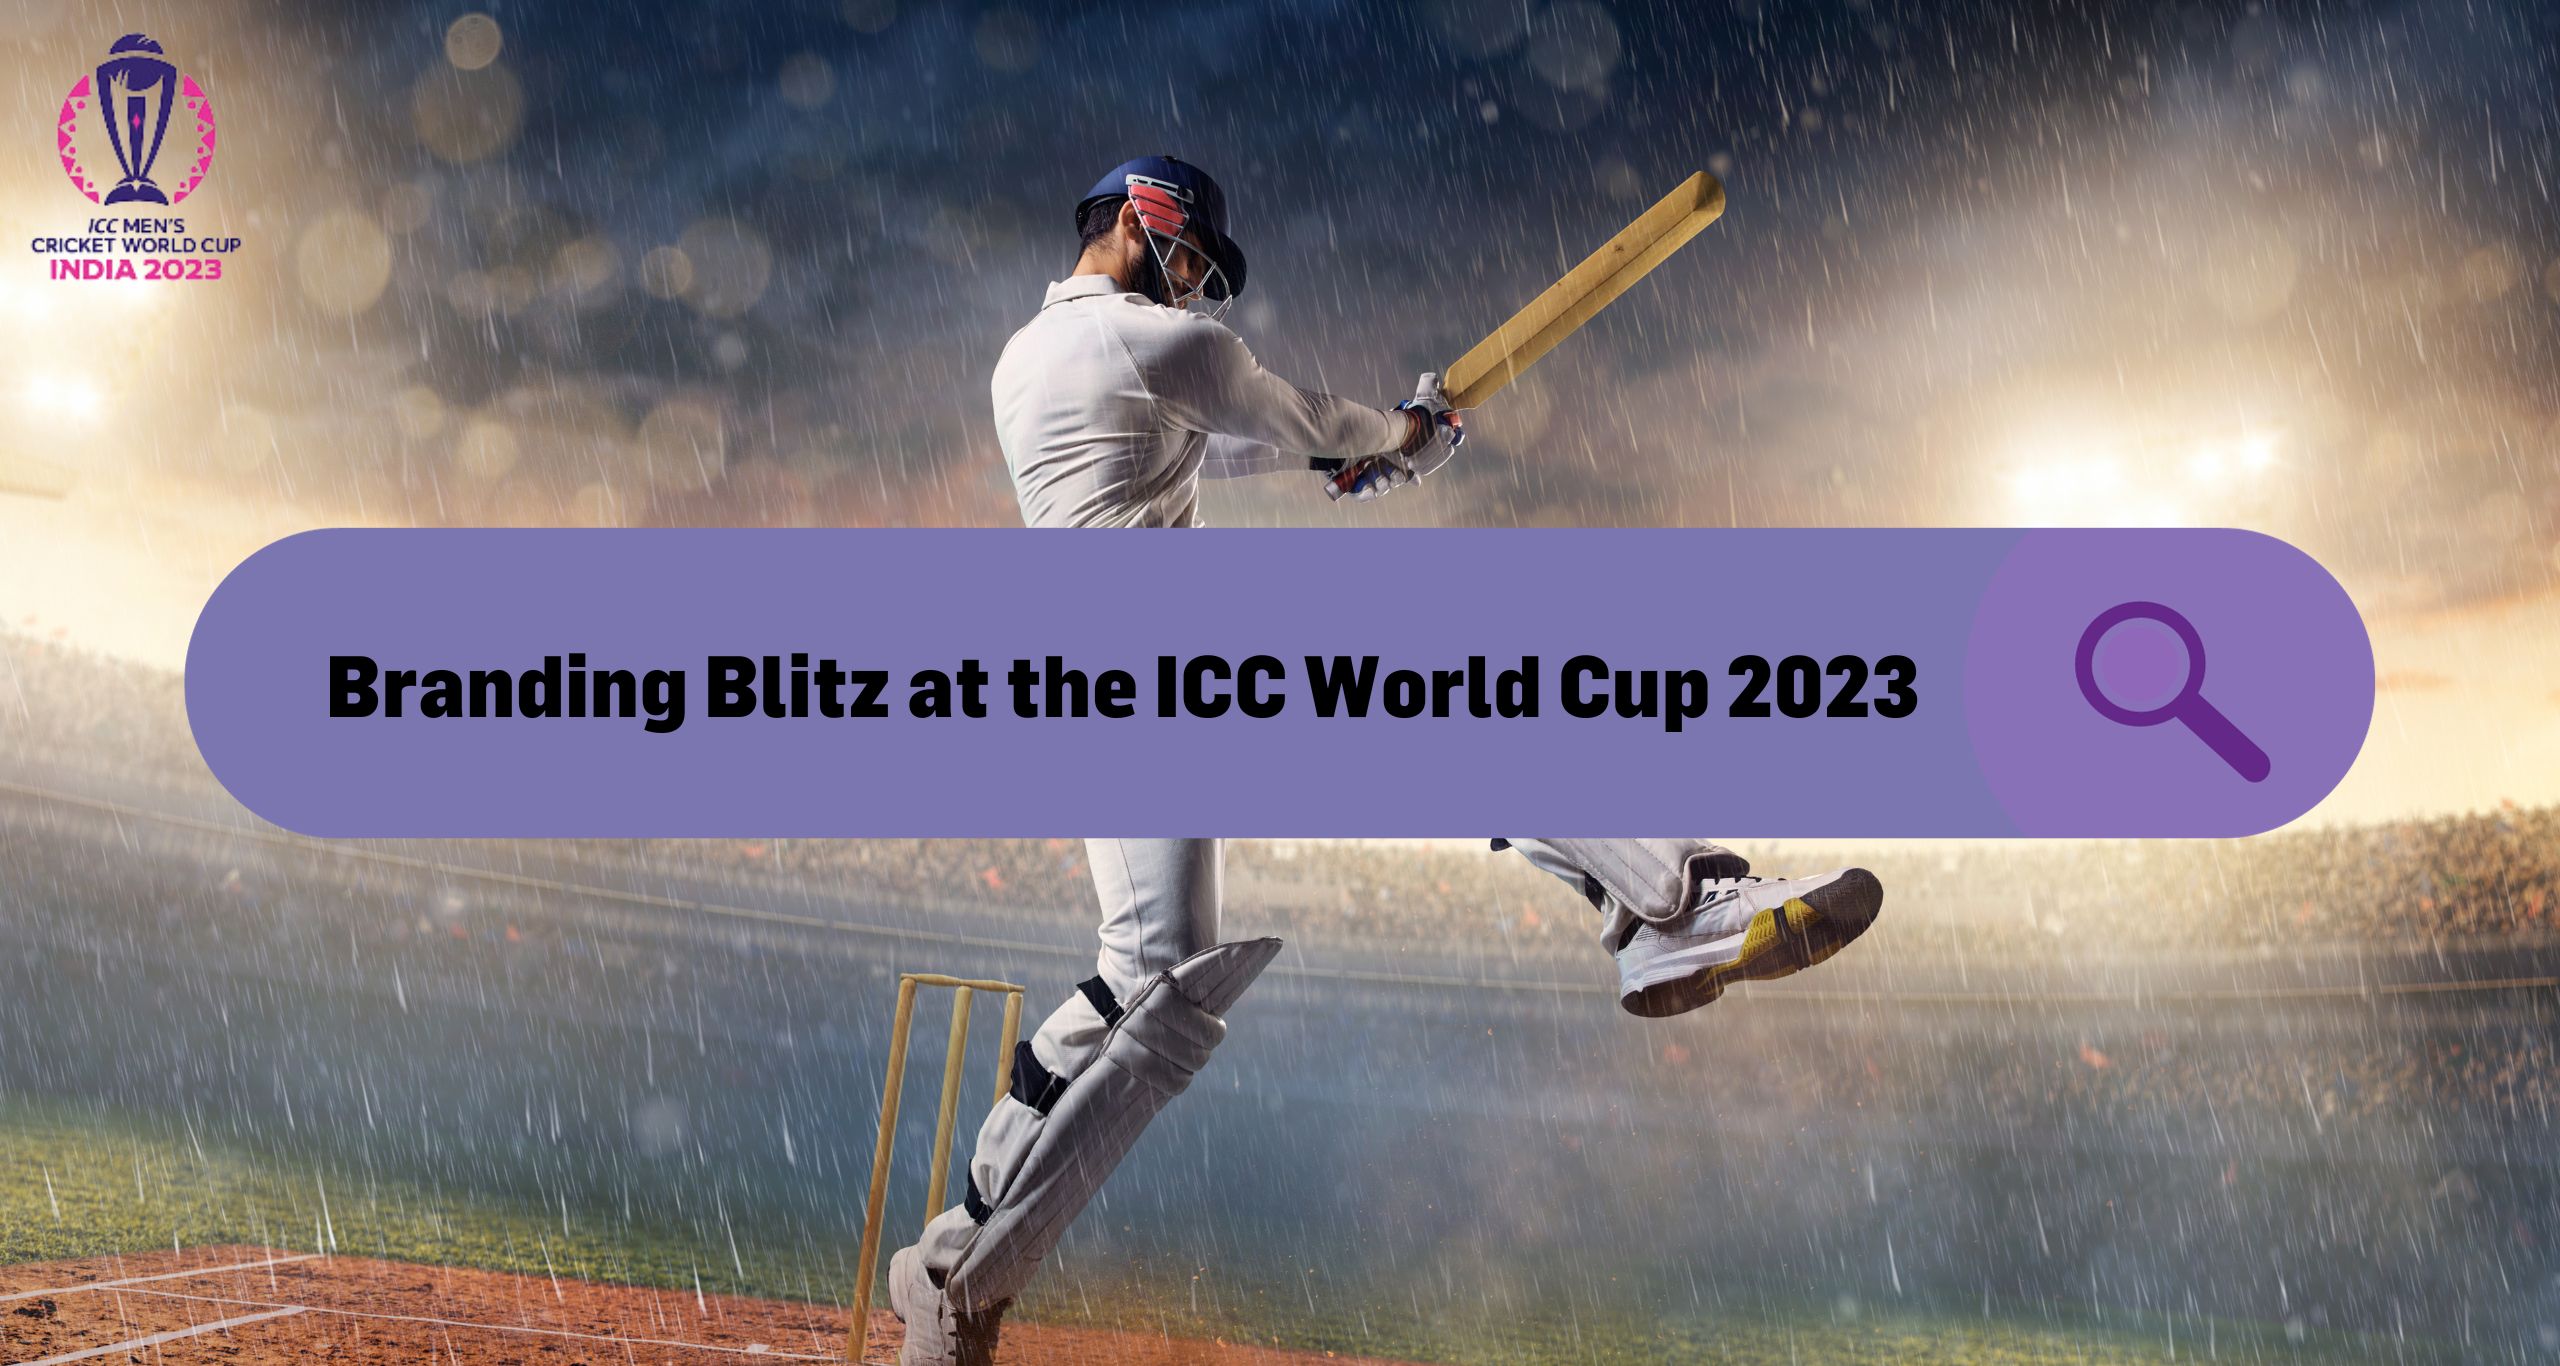 Branding Blitz at the ICC World Cup 2023